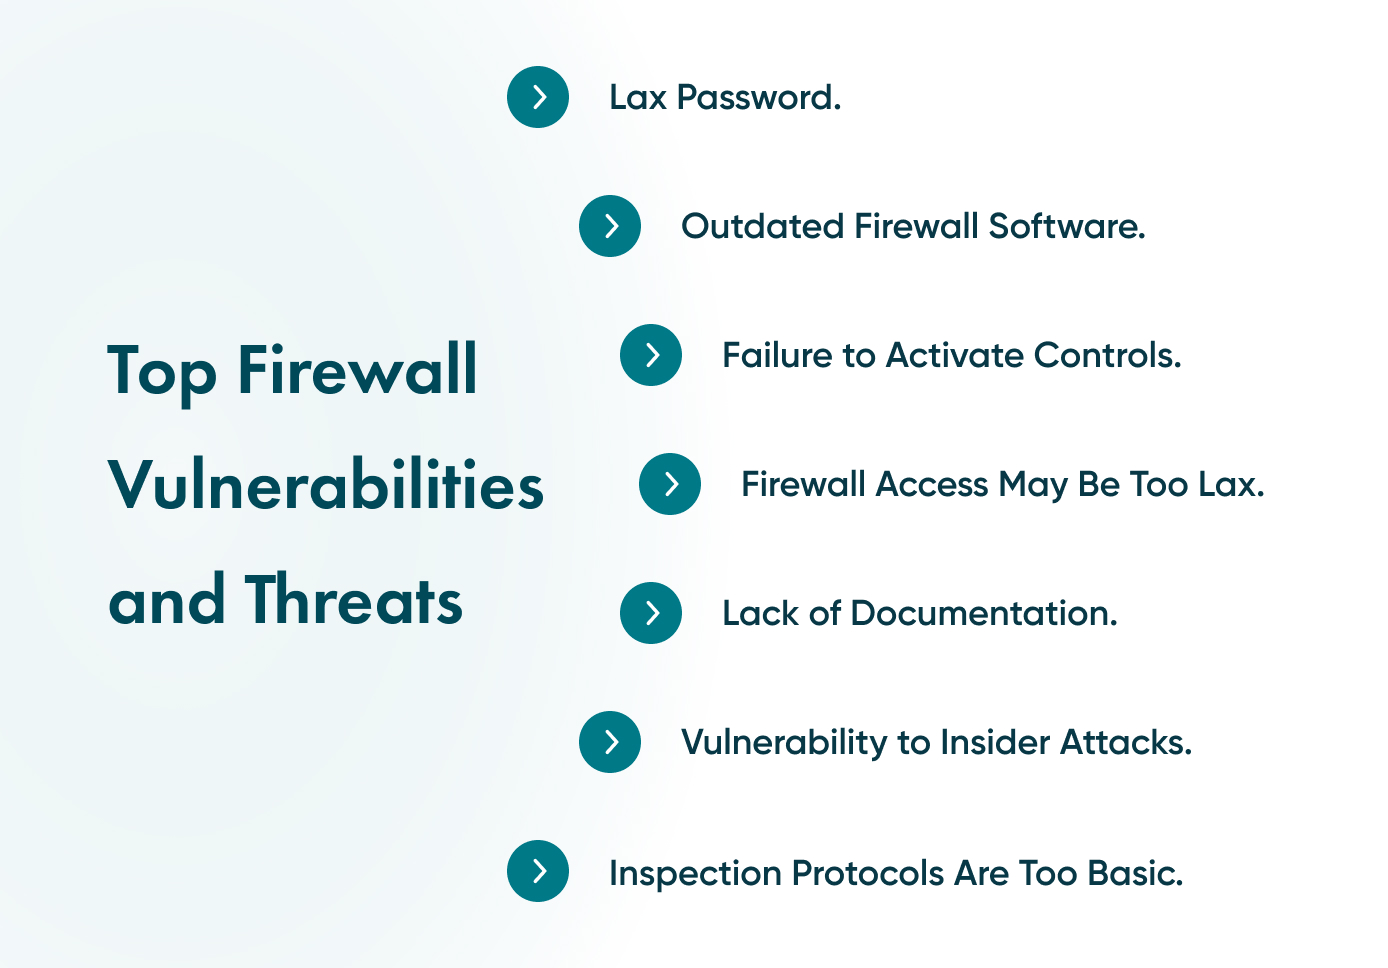 Firewalls are your immediate protection from the outside world. Using them as part of your cybersecurity plan will go a long way in protecting your systems.